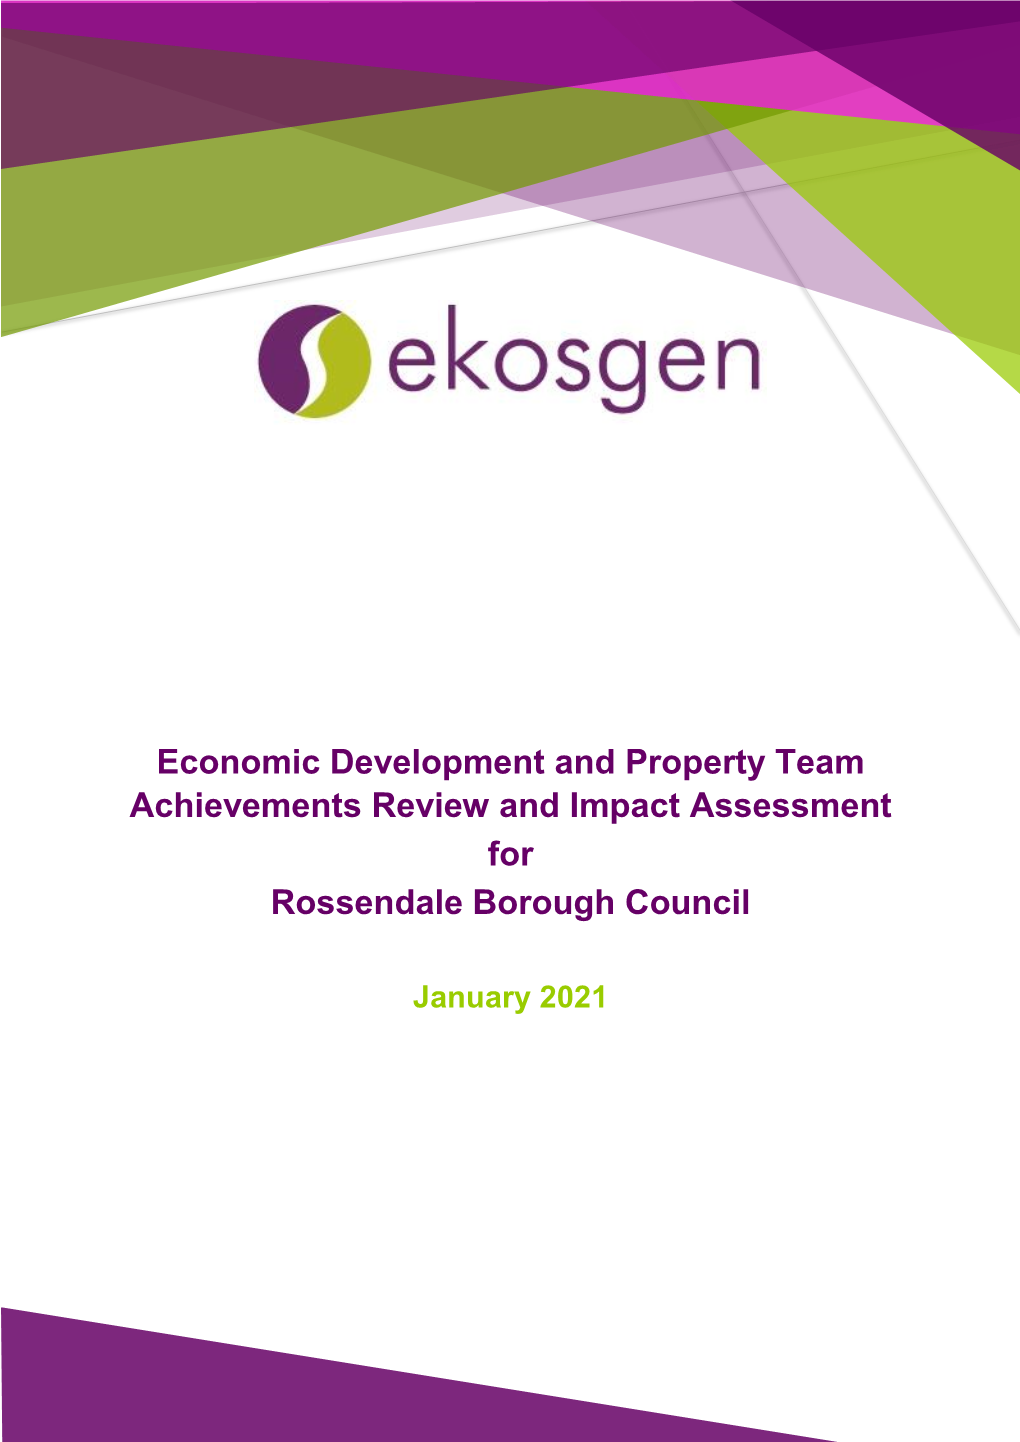 Economic Development and Property Team Achievements Review and Impact Assessment for Rossendale Borough Council